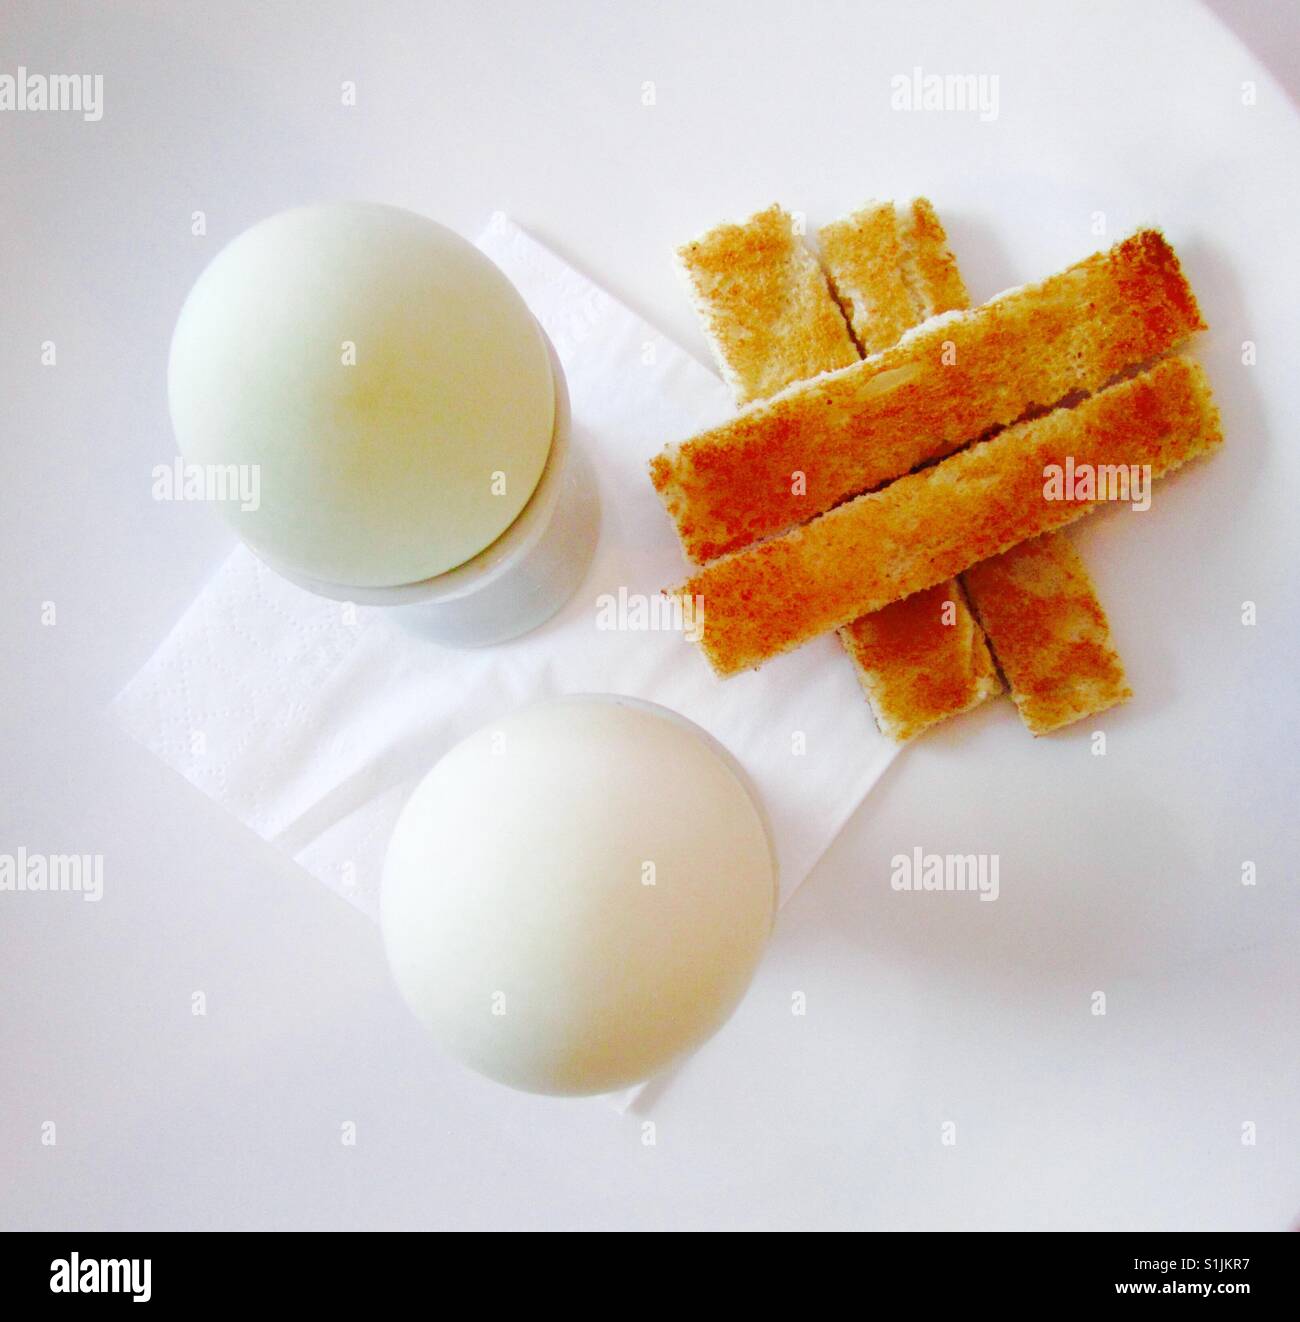 Eggs and toast Stock Photo